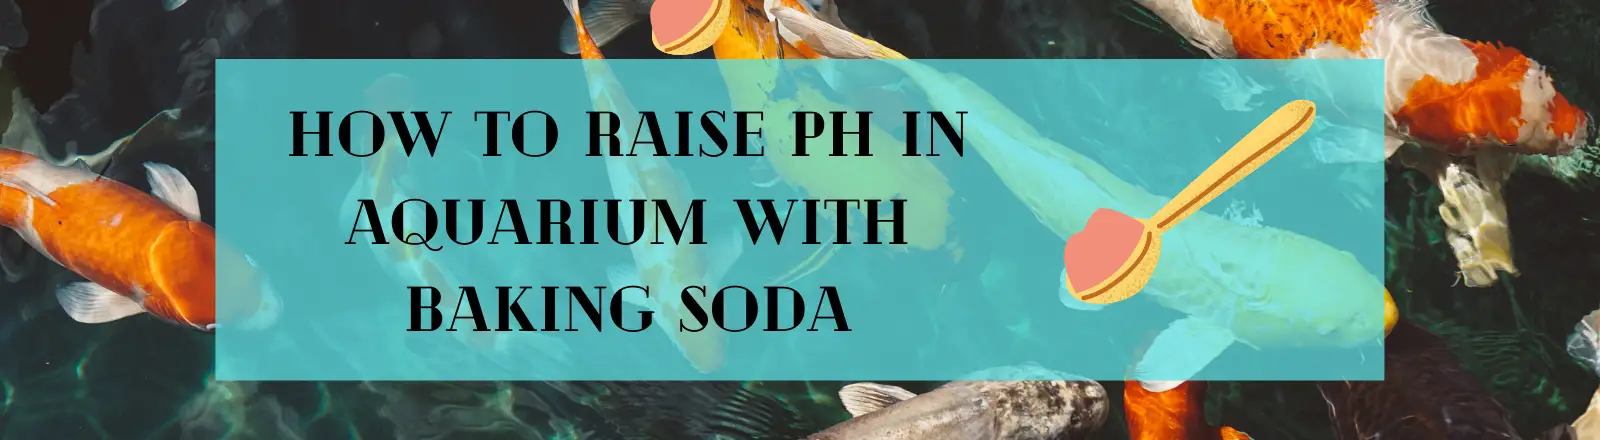 How to raise pH in fish tank with Baking soda- [Complete guide]<span class="wtr-time-wrap after-title"><span class="wtr-time-number">12</span> min read</span>